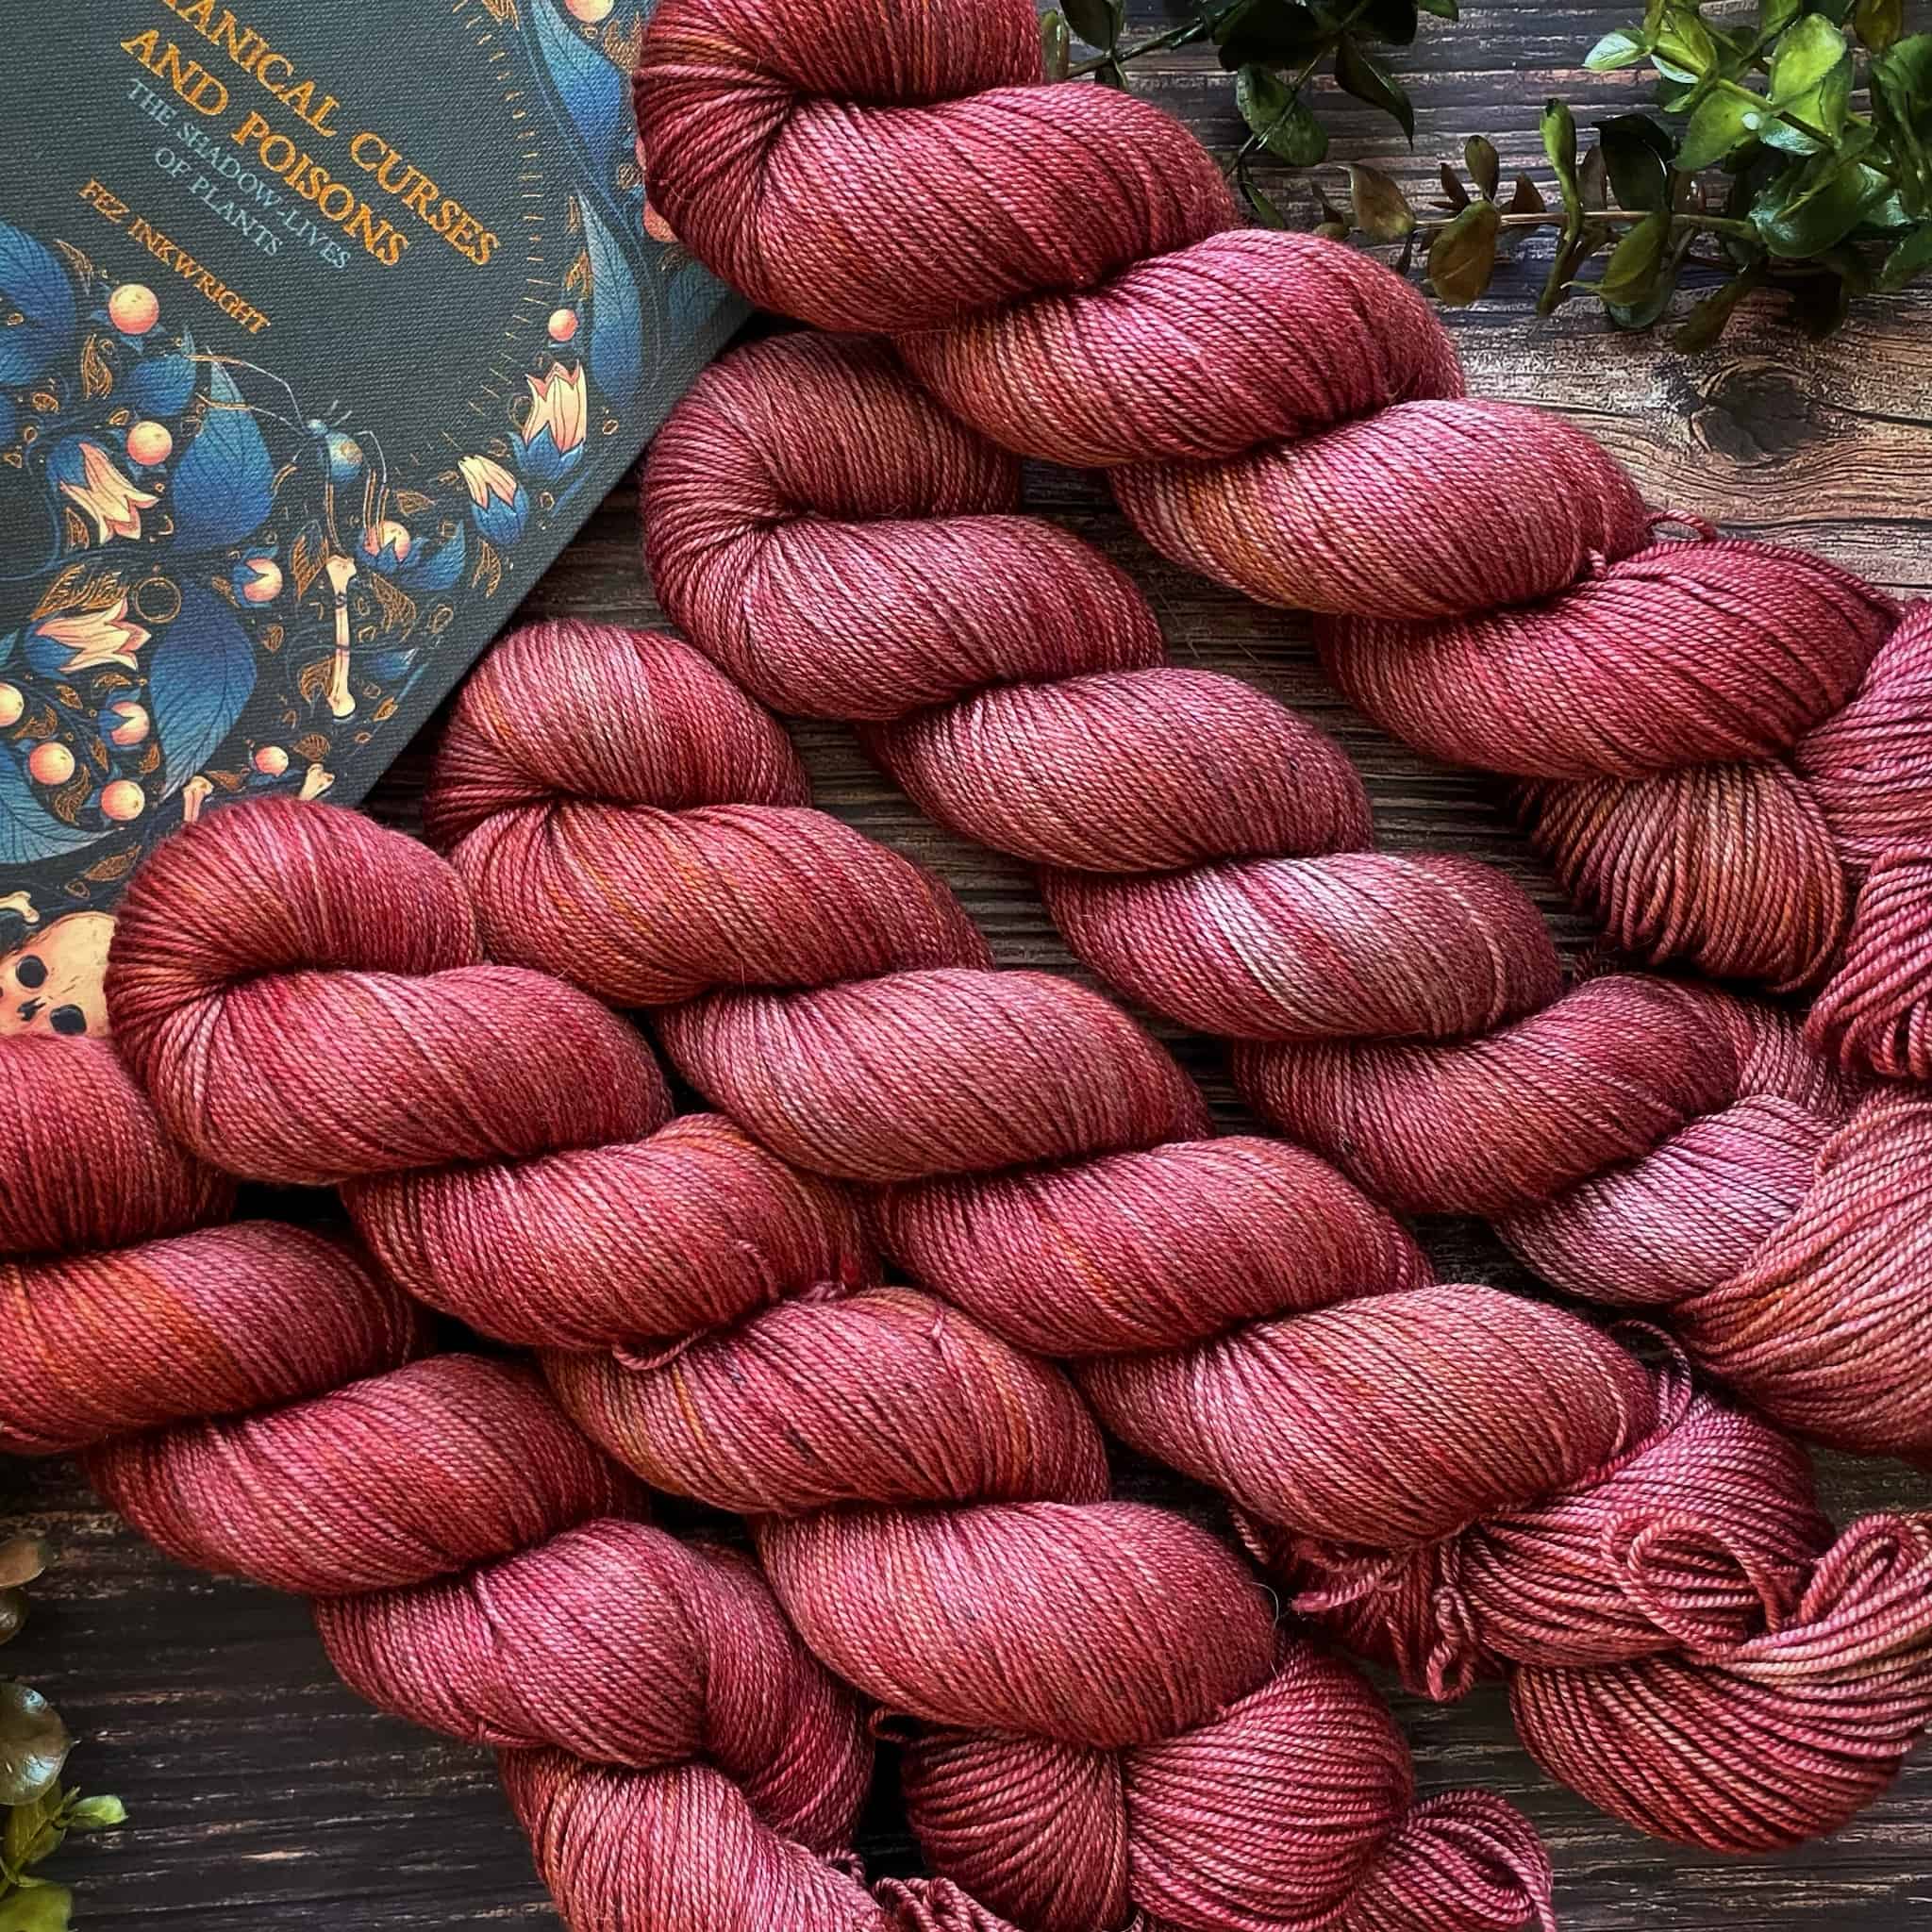 An angled view of five moody red skeins with hints of silver and brass surrounded by greenery and laying against a blue book with the title "Botanical Curses and Poisons."